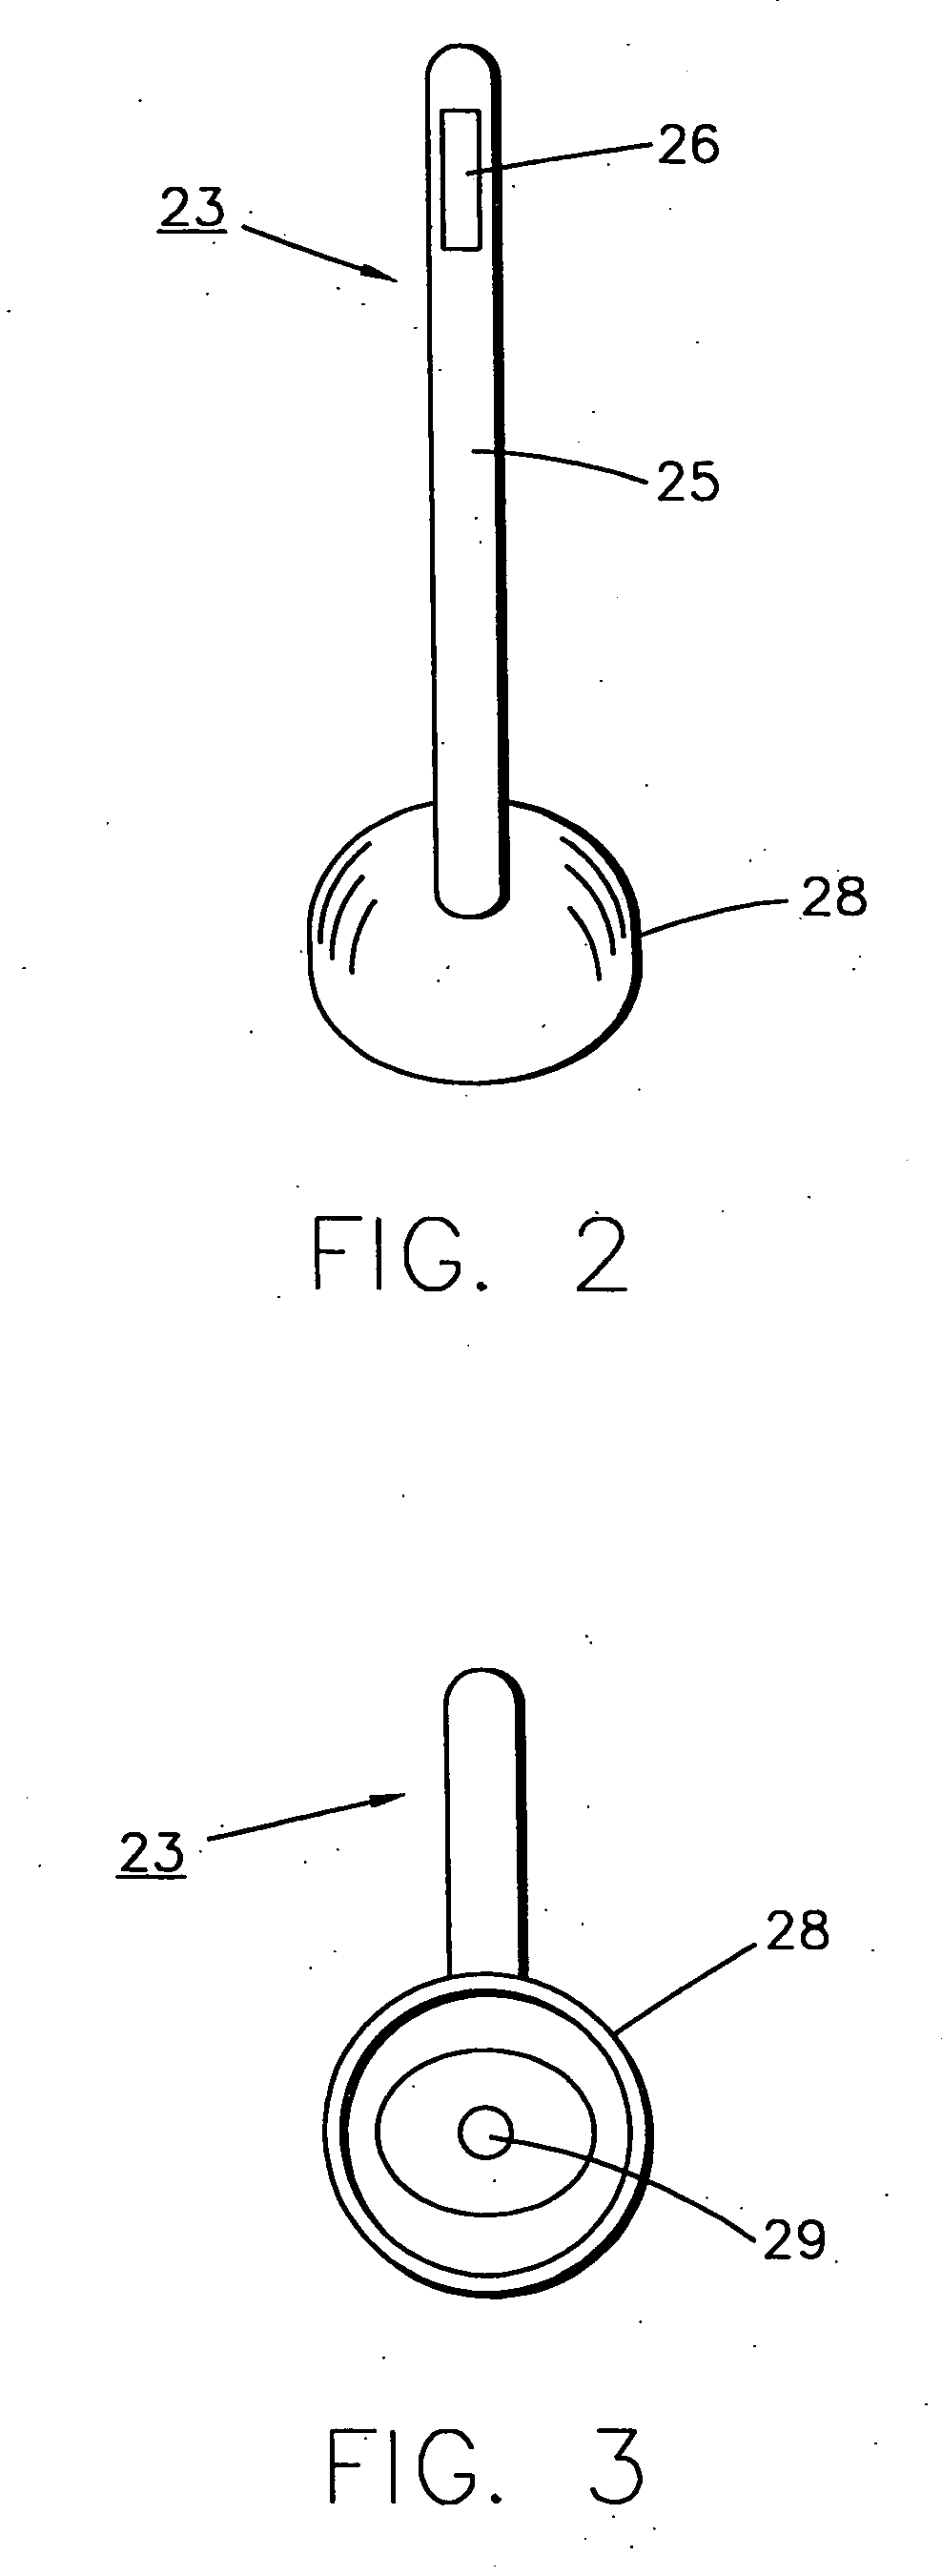 Foam/spray producing compositions and dispensing system therefor